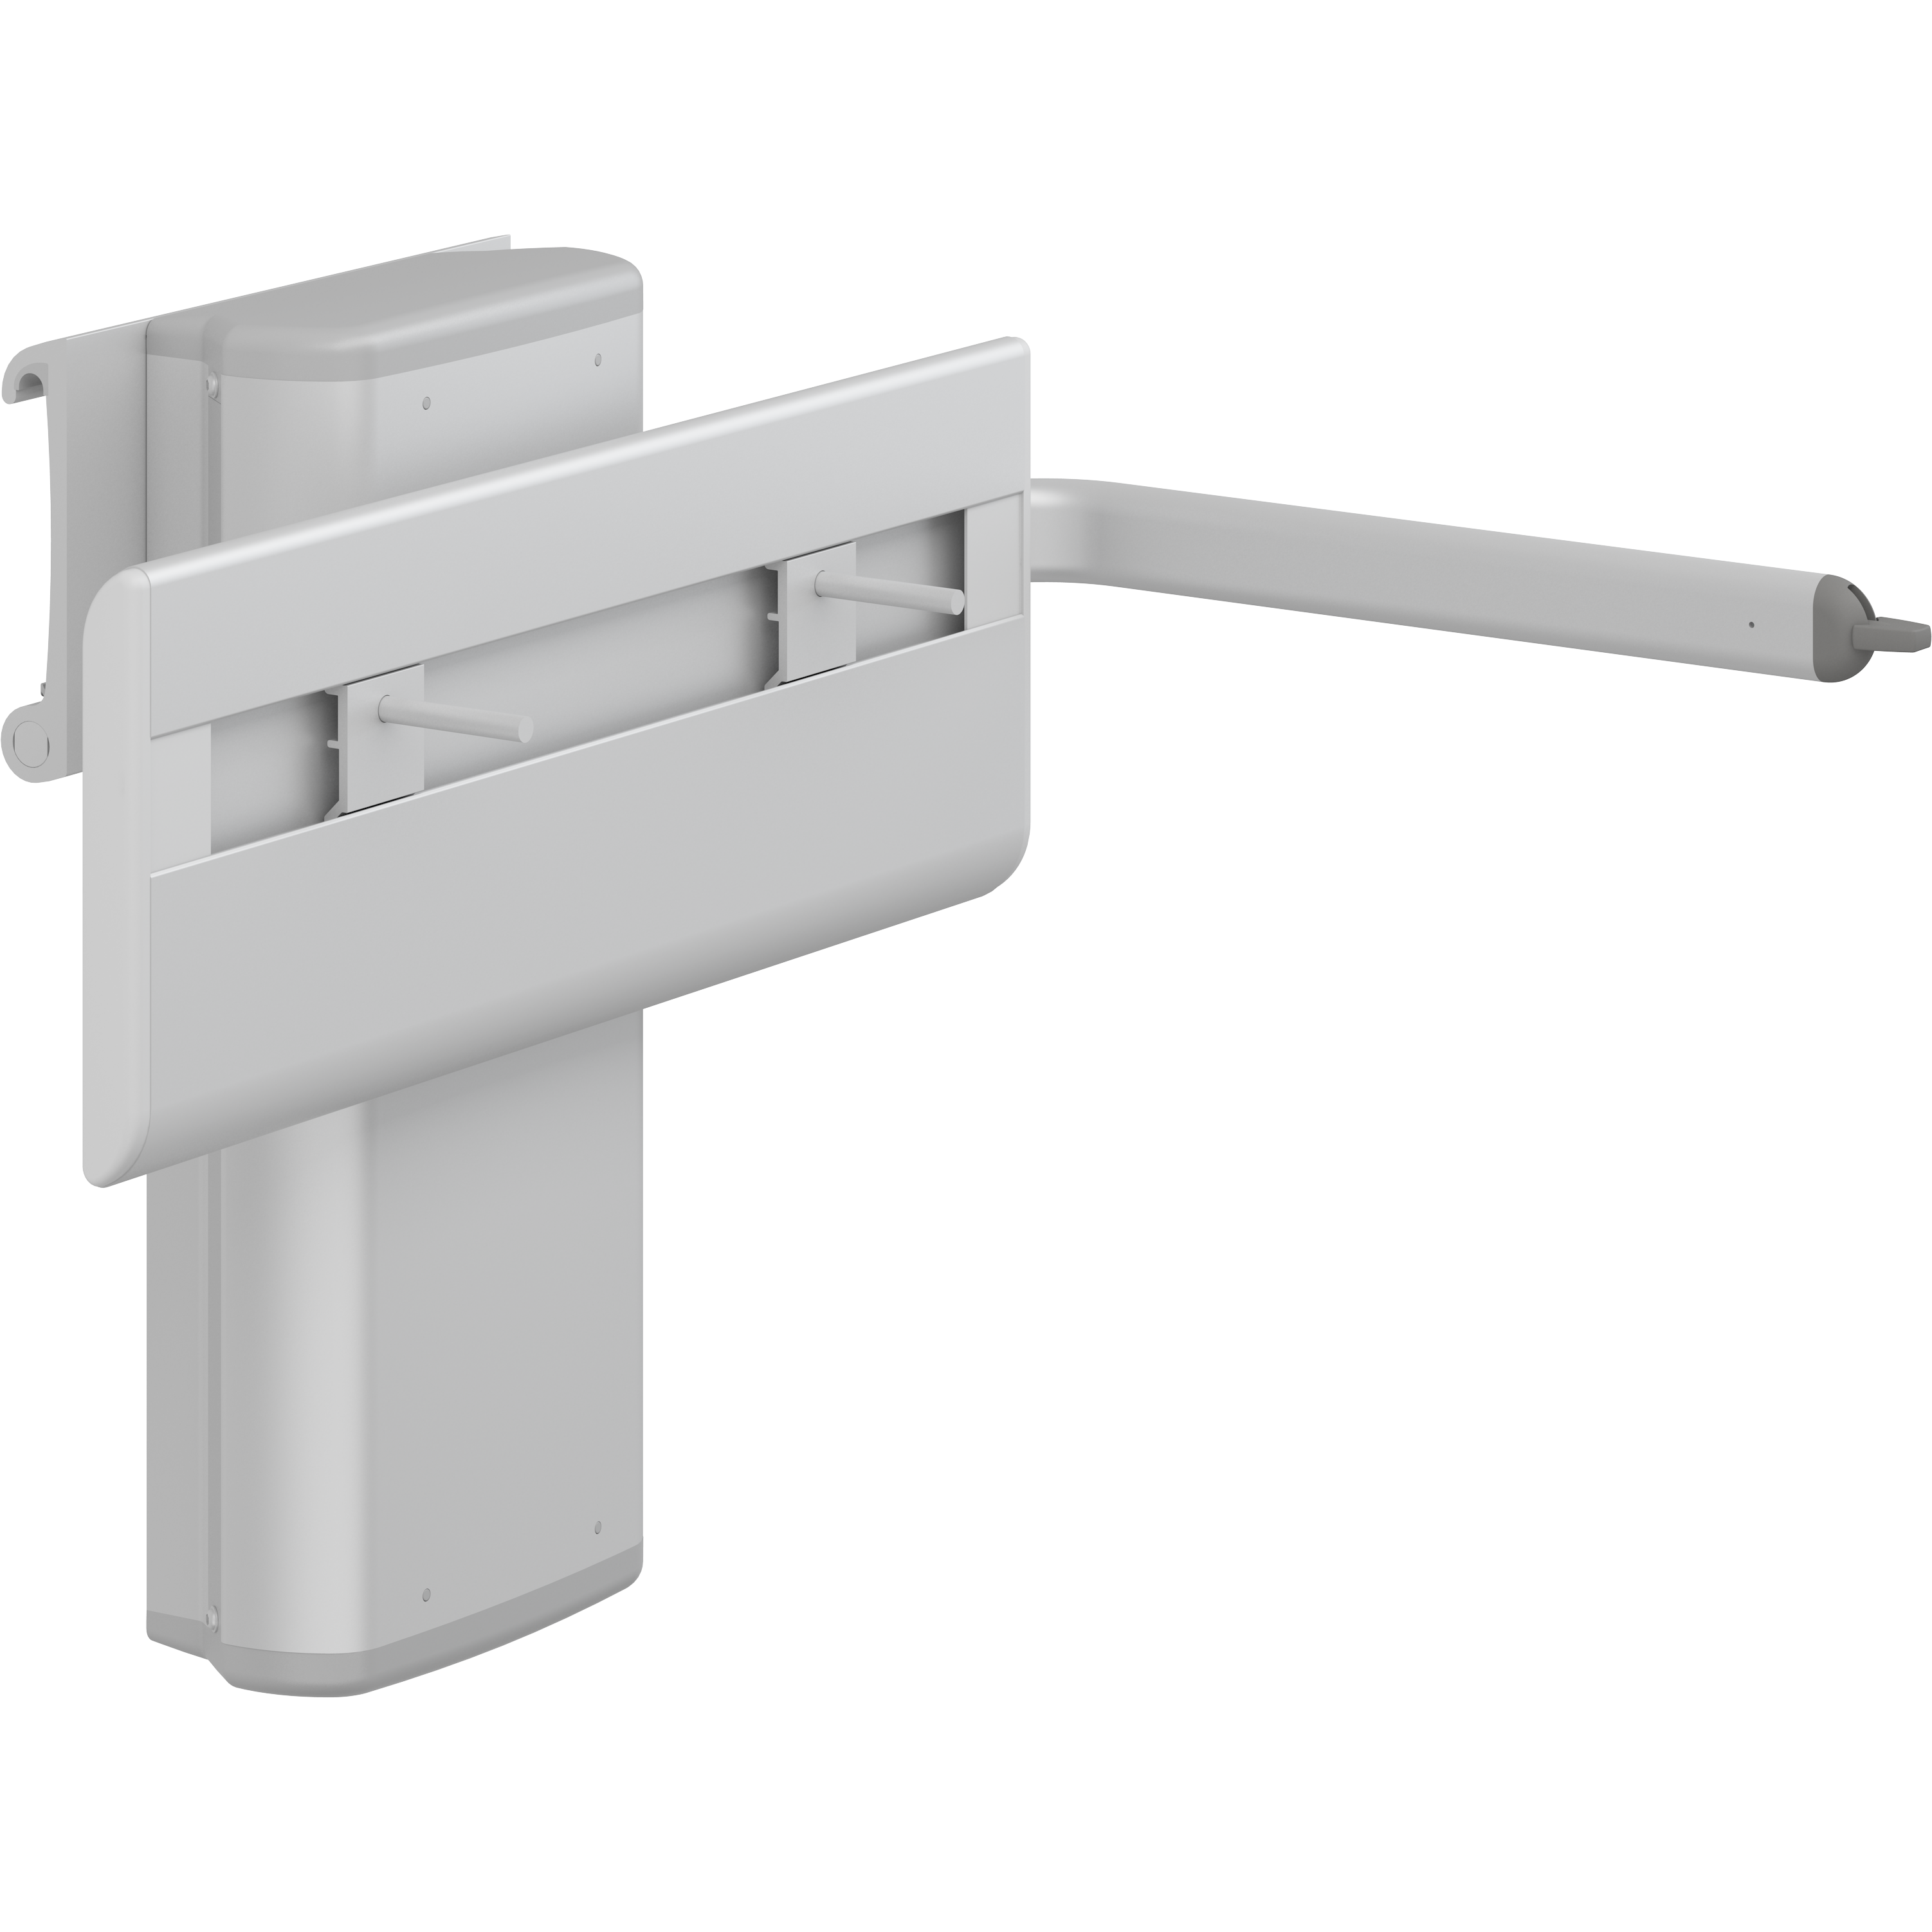 PLUS sink bracket with lever control, manually height adjustable and horizontally adjustable with pneumatic cylinder